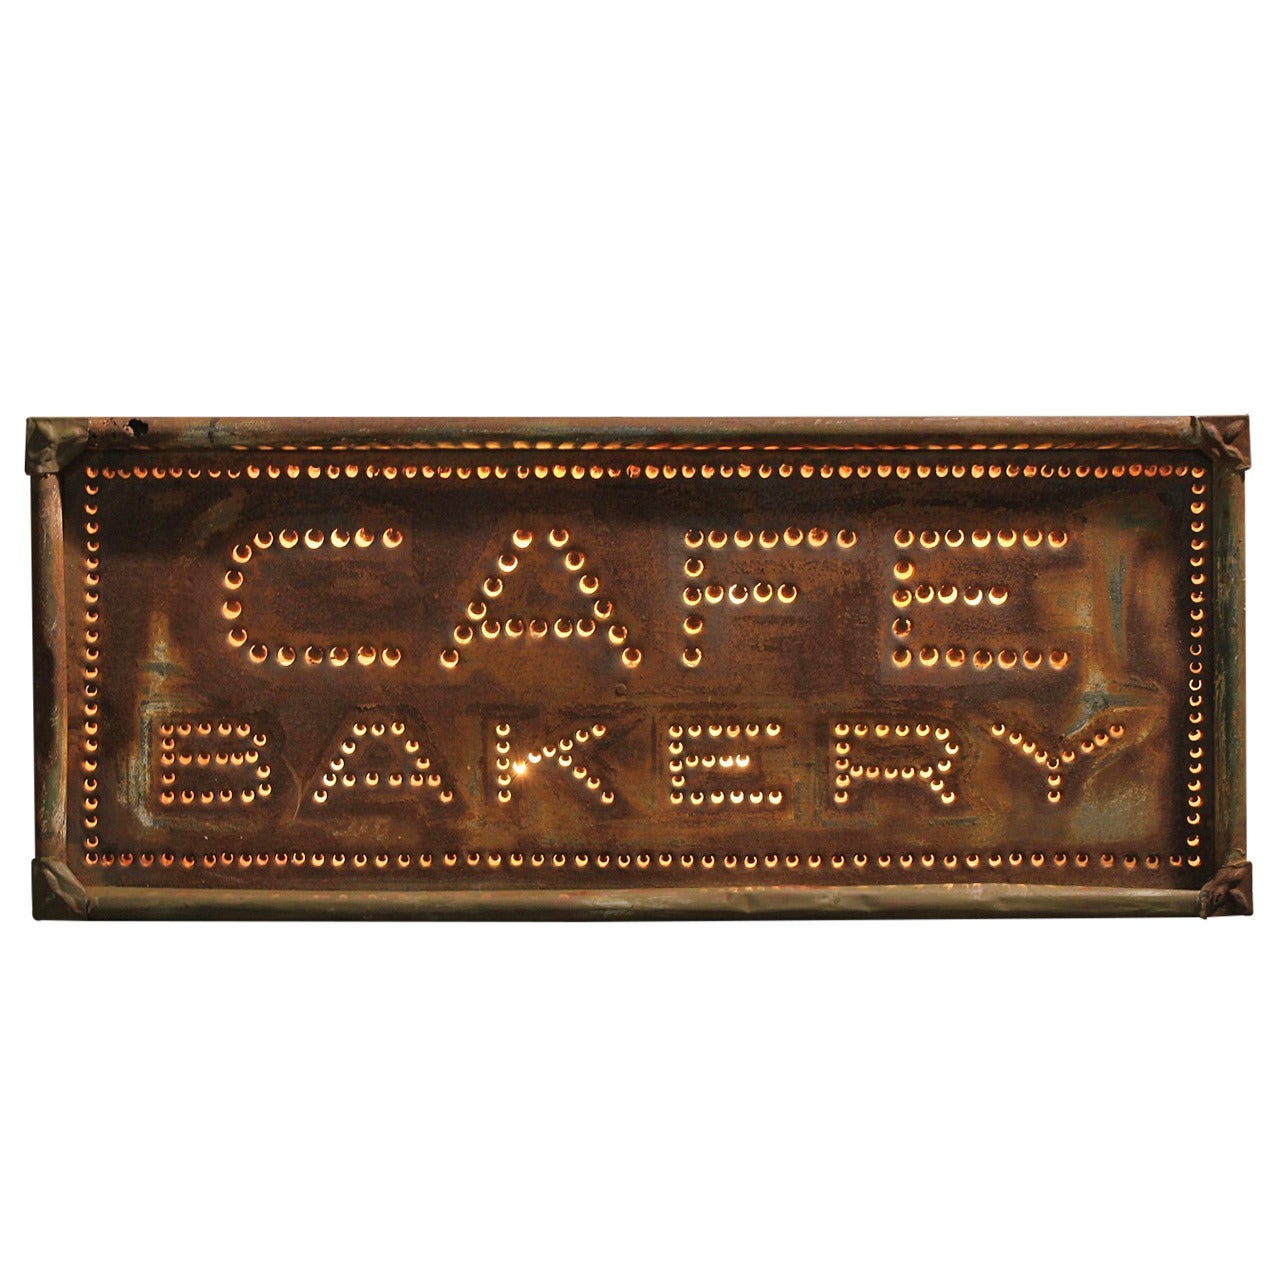 Antique American Light Up Tin Sign "Cafe Bakery"